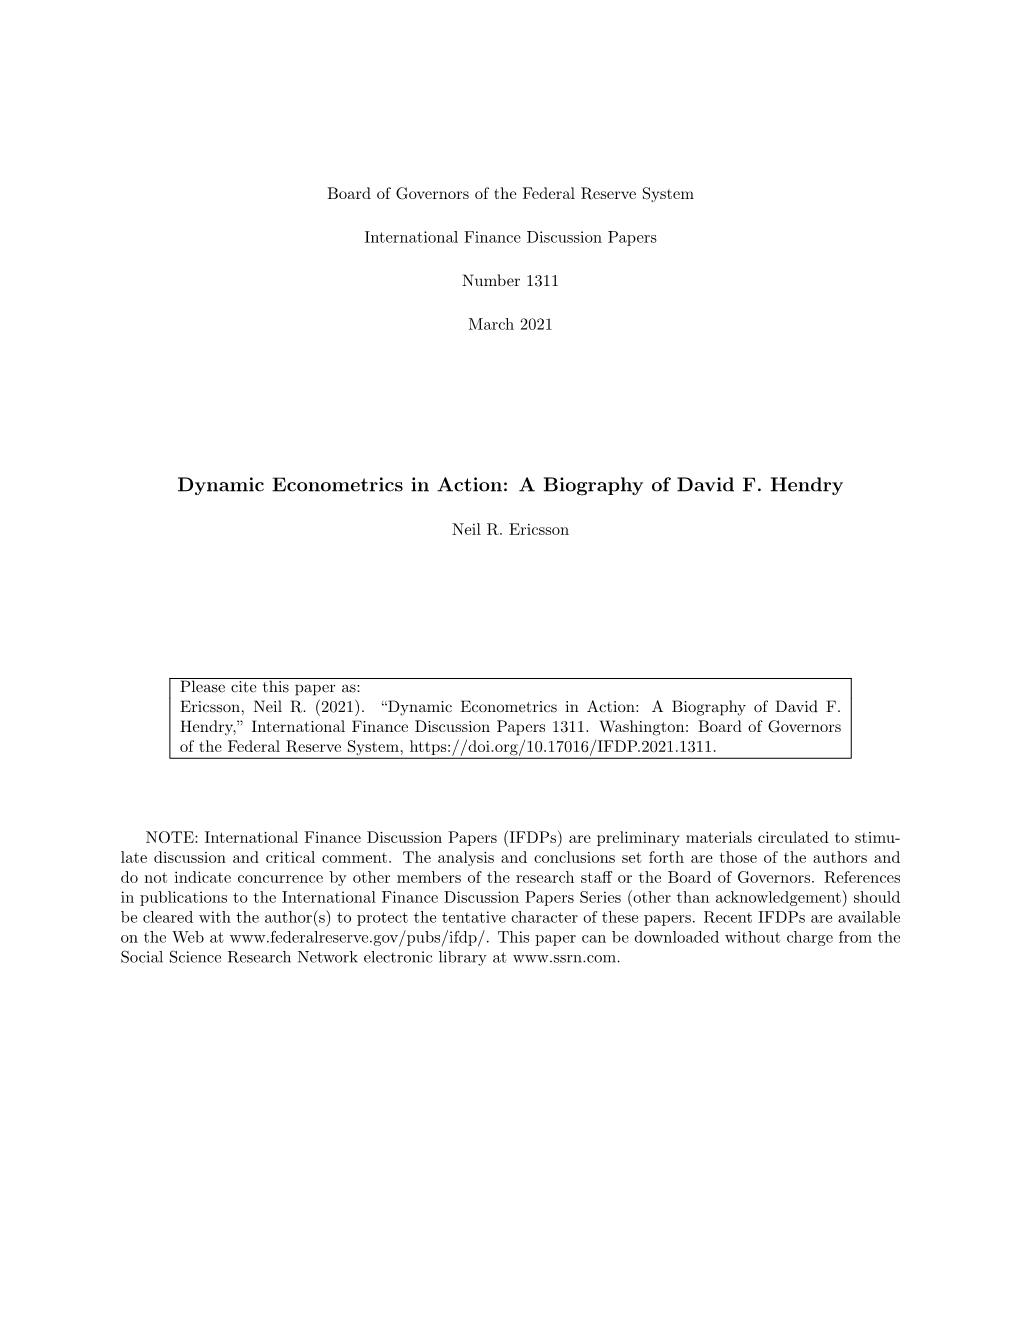 Dynamic Econometrics in Action: a Biography of David F. Hendry